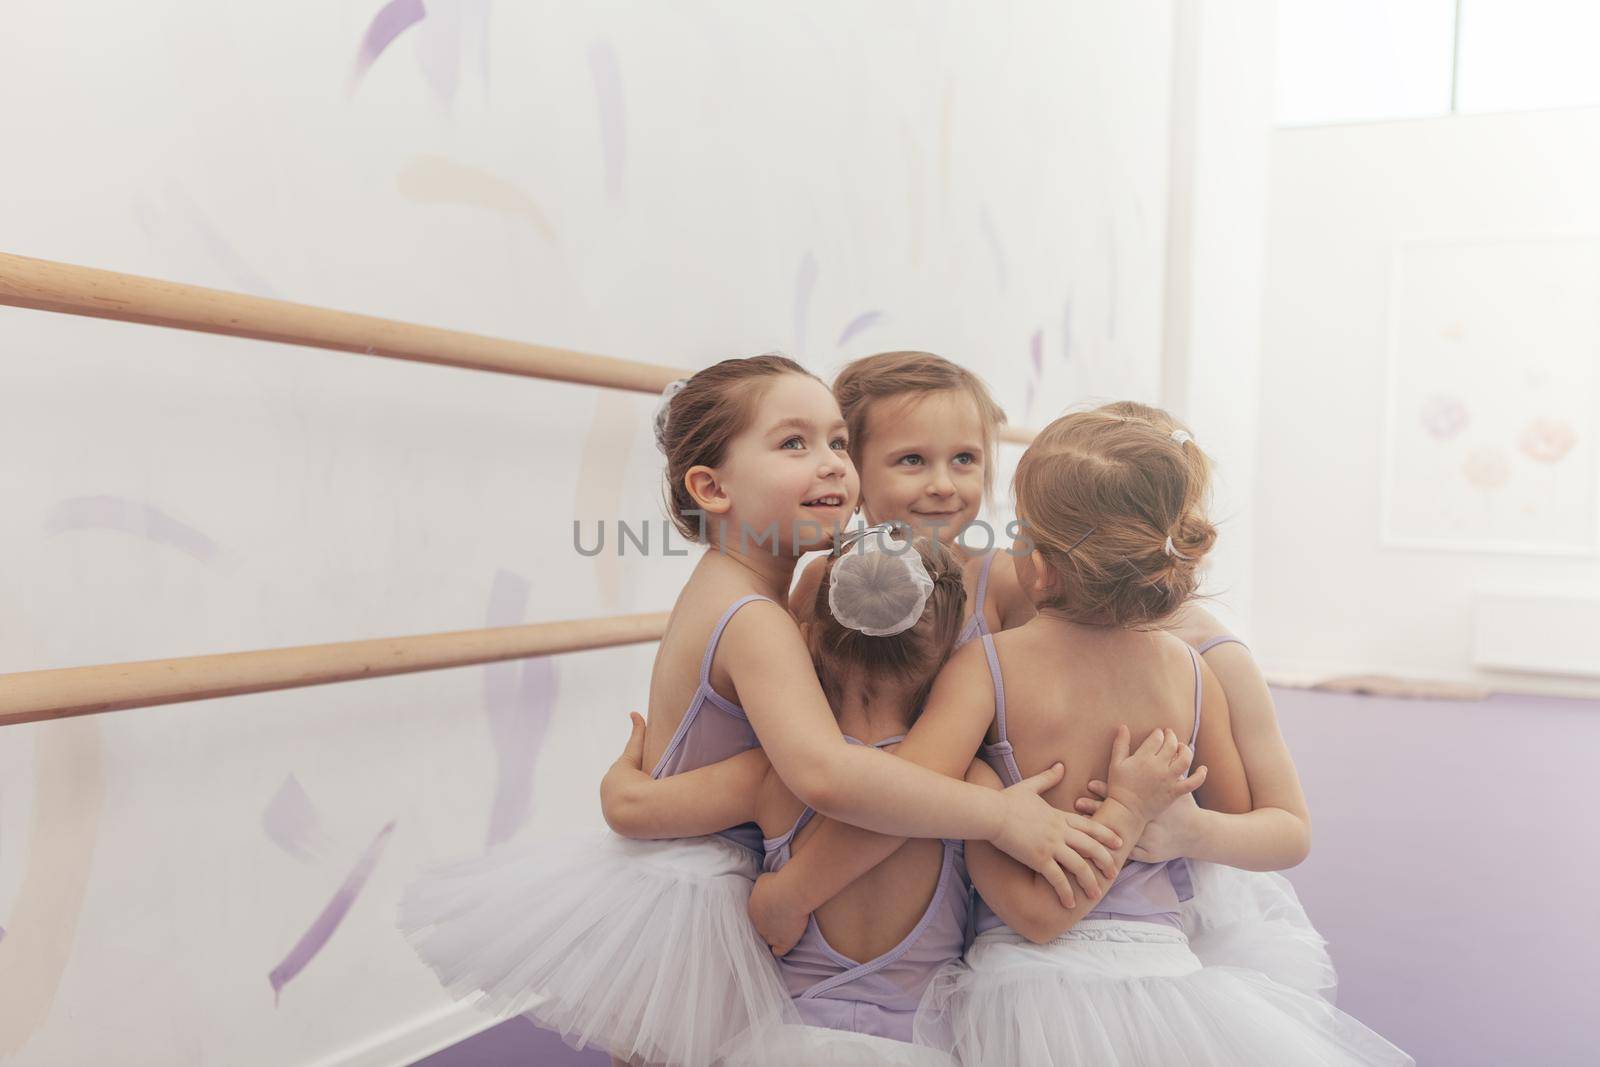 Adorable litlle ballerinas having fun at dance studio, smiling and hugging together. Group of cute little girls in tutu skirts celebrating, embracing each other. Unity, friendship, childhood concept